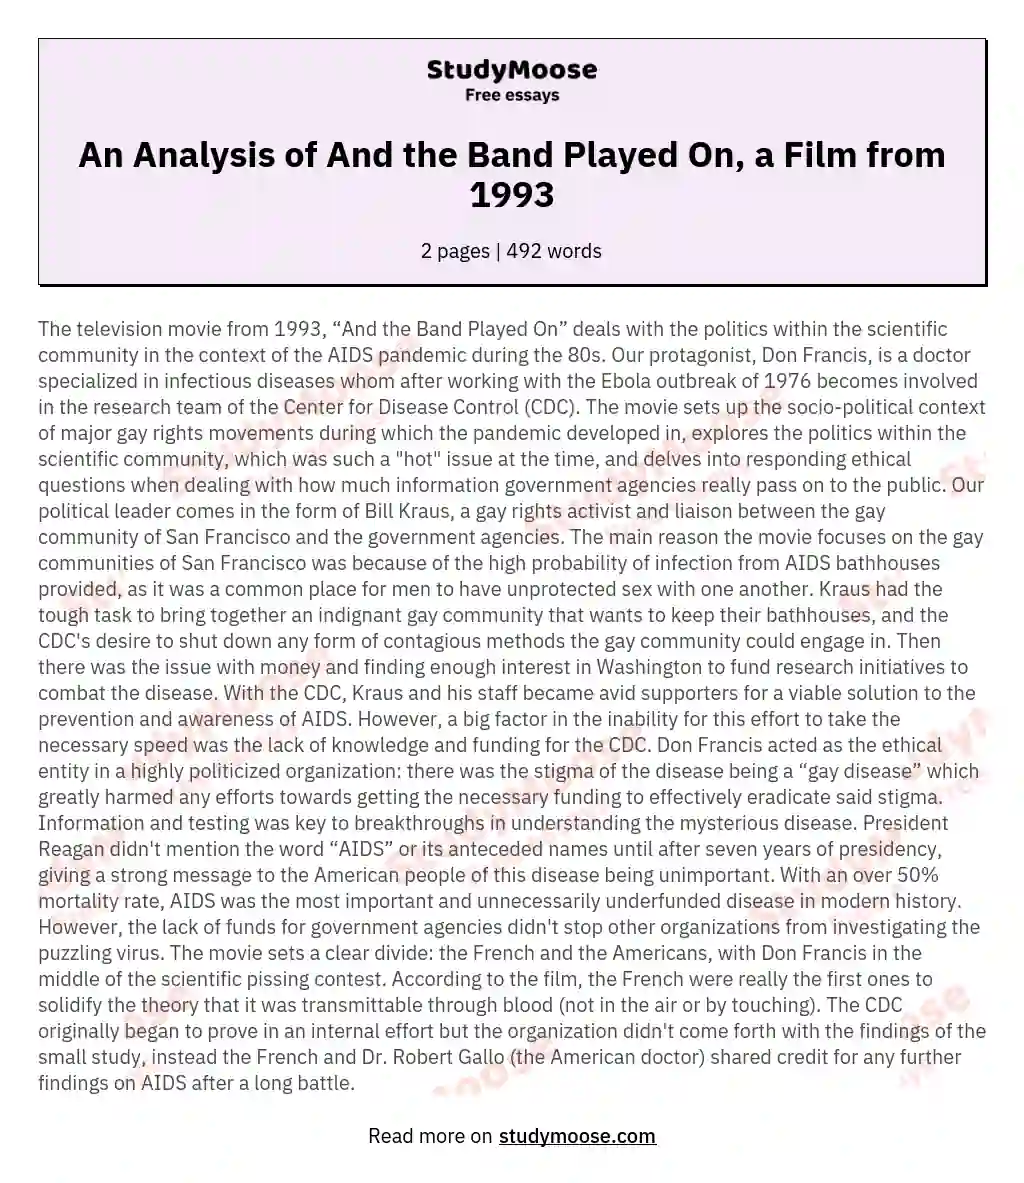 An Analysis of And the Band Played On, a Film from 1993 essay